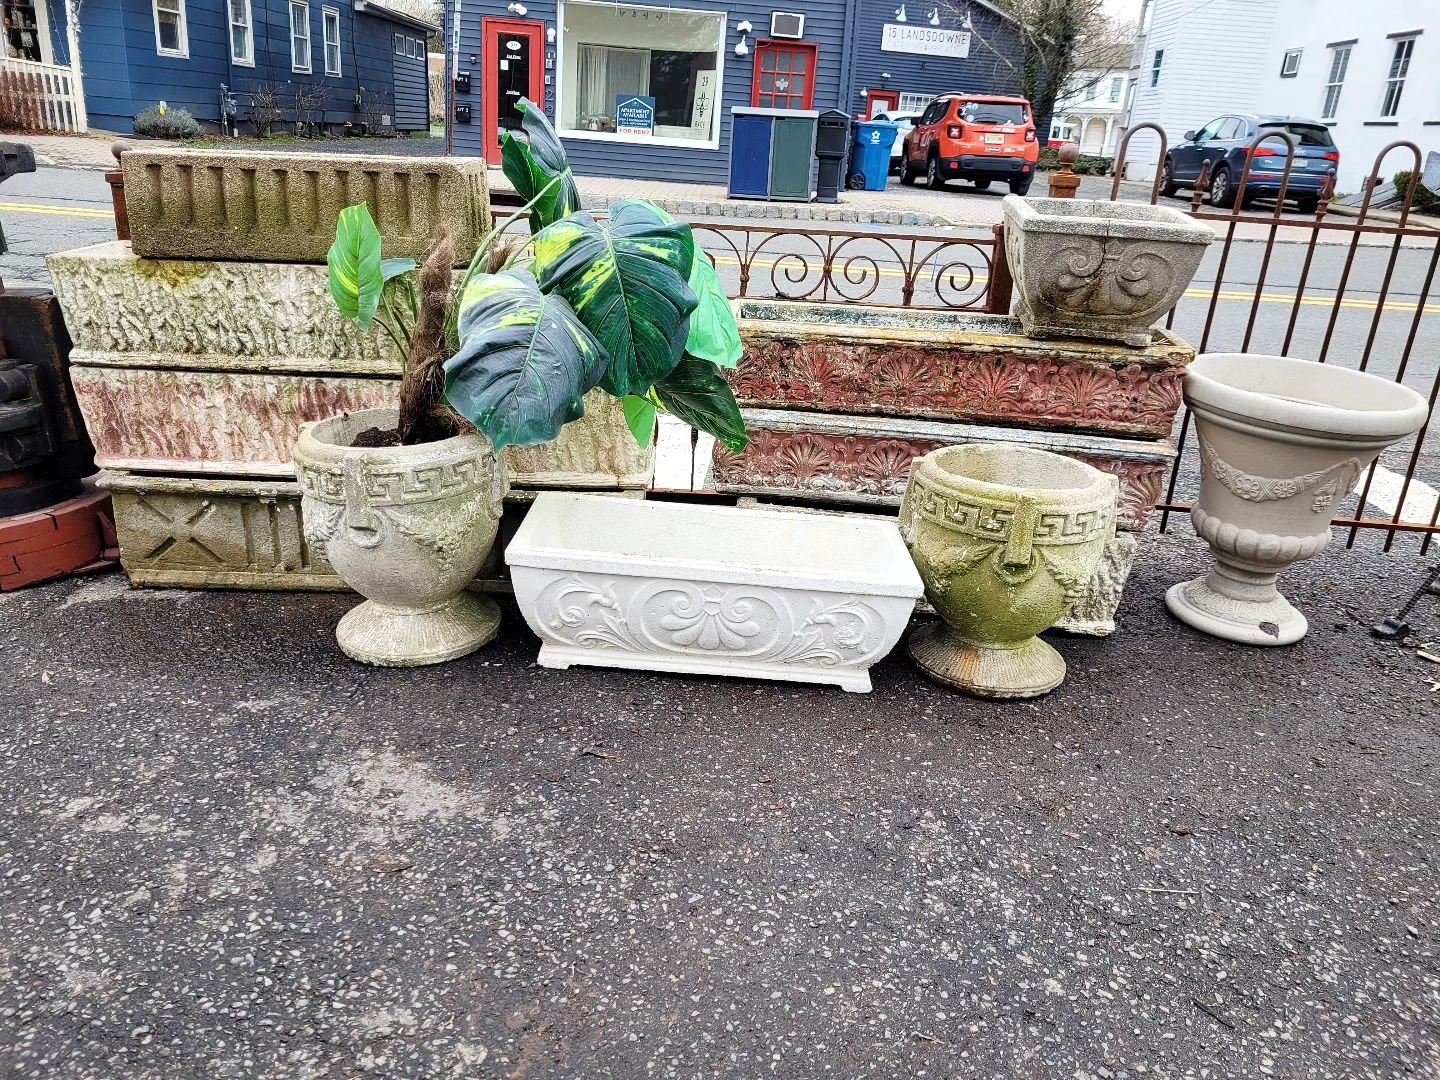 🪴 Concrete planters 🪴 

#mergegallery #frenchtownnj #concreteplanter #flowerpot #flowers #garden #planterbox #urn